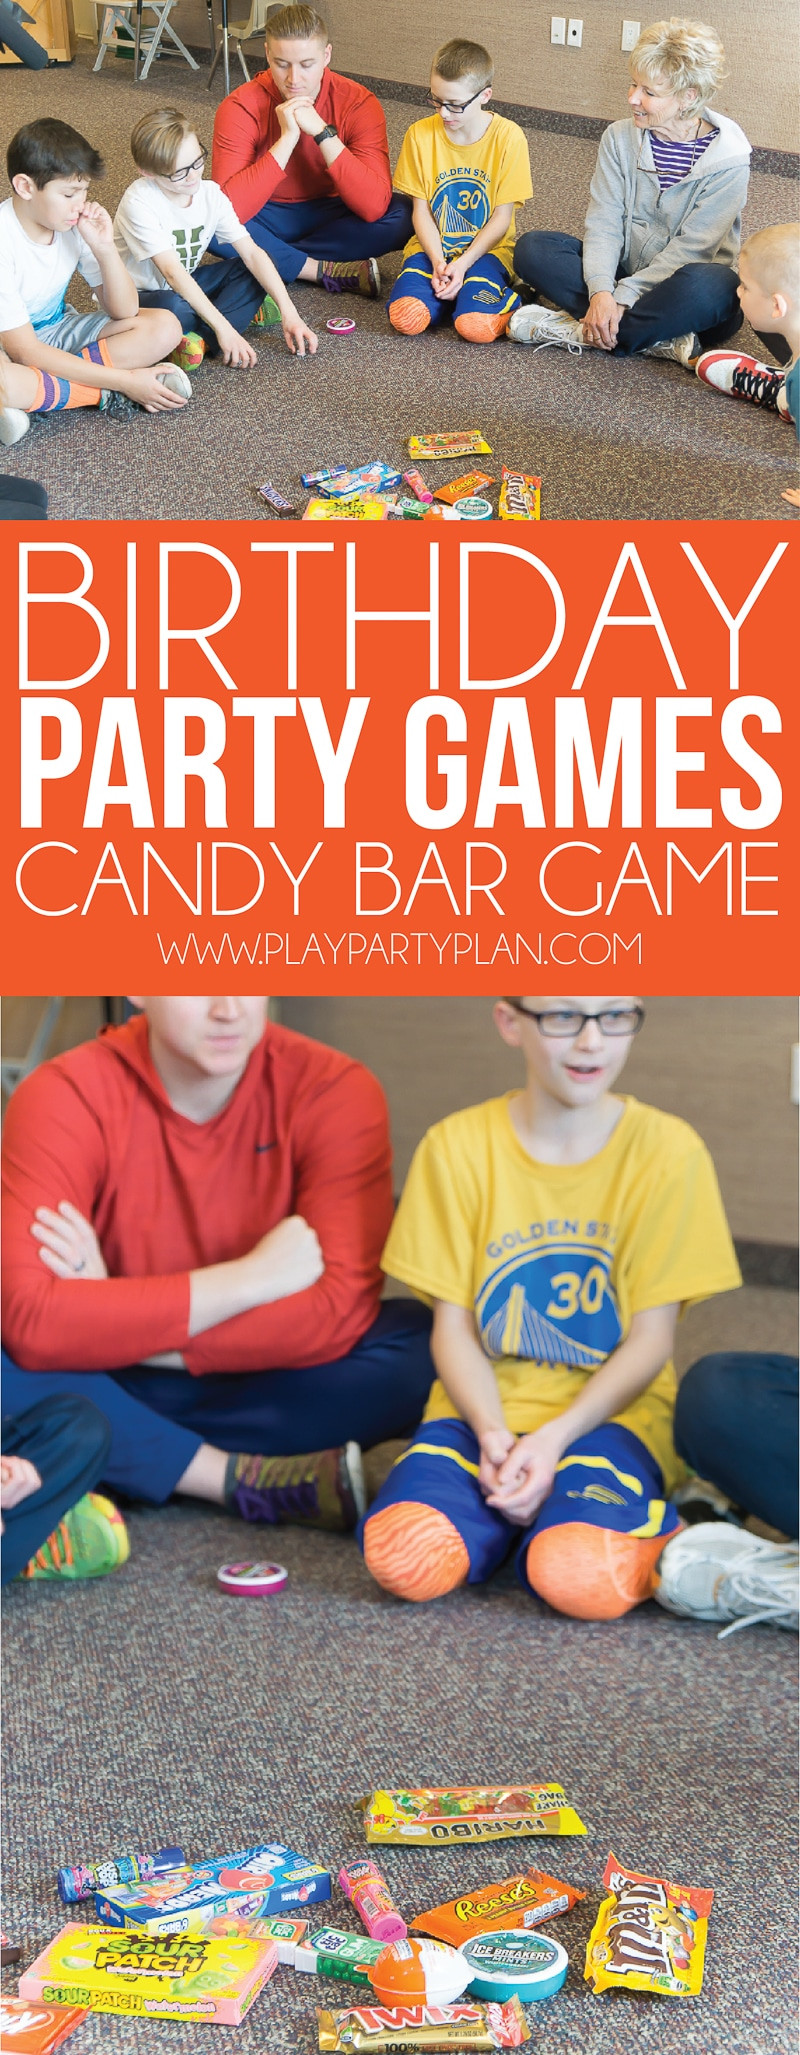 Child Birthday Party Game
 Hilarious Birthday Party Games for Kids & Adults Play